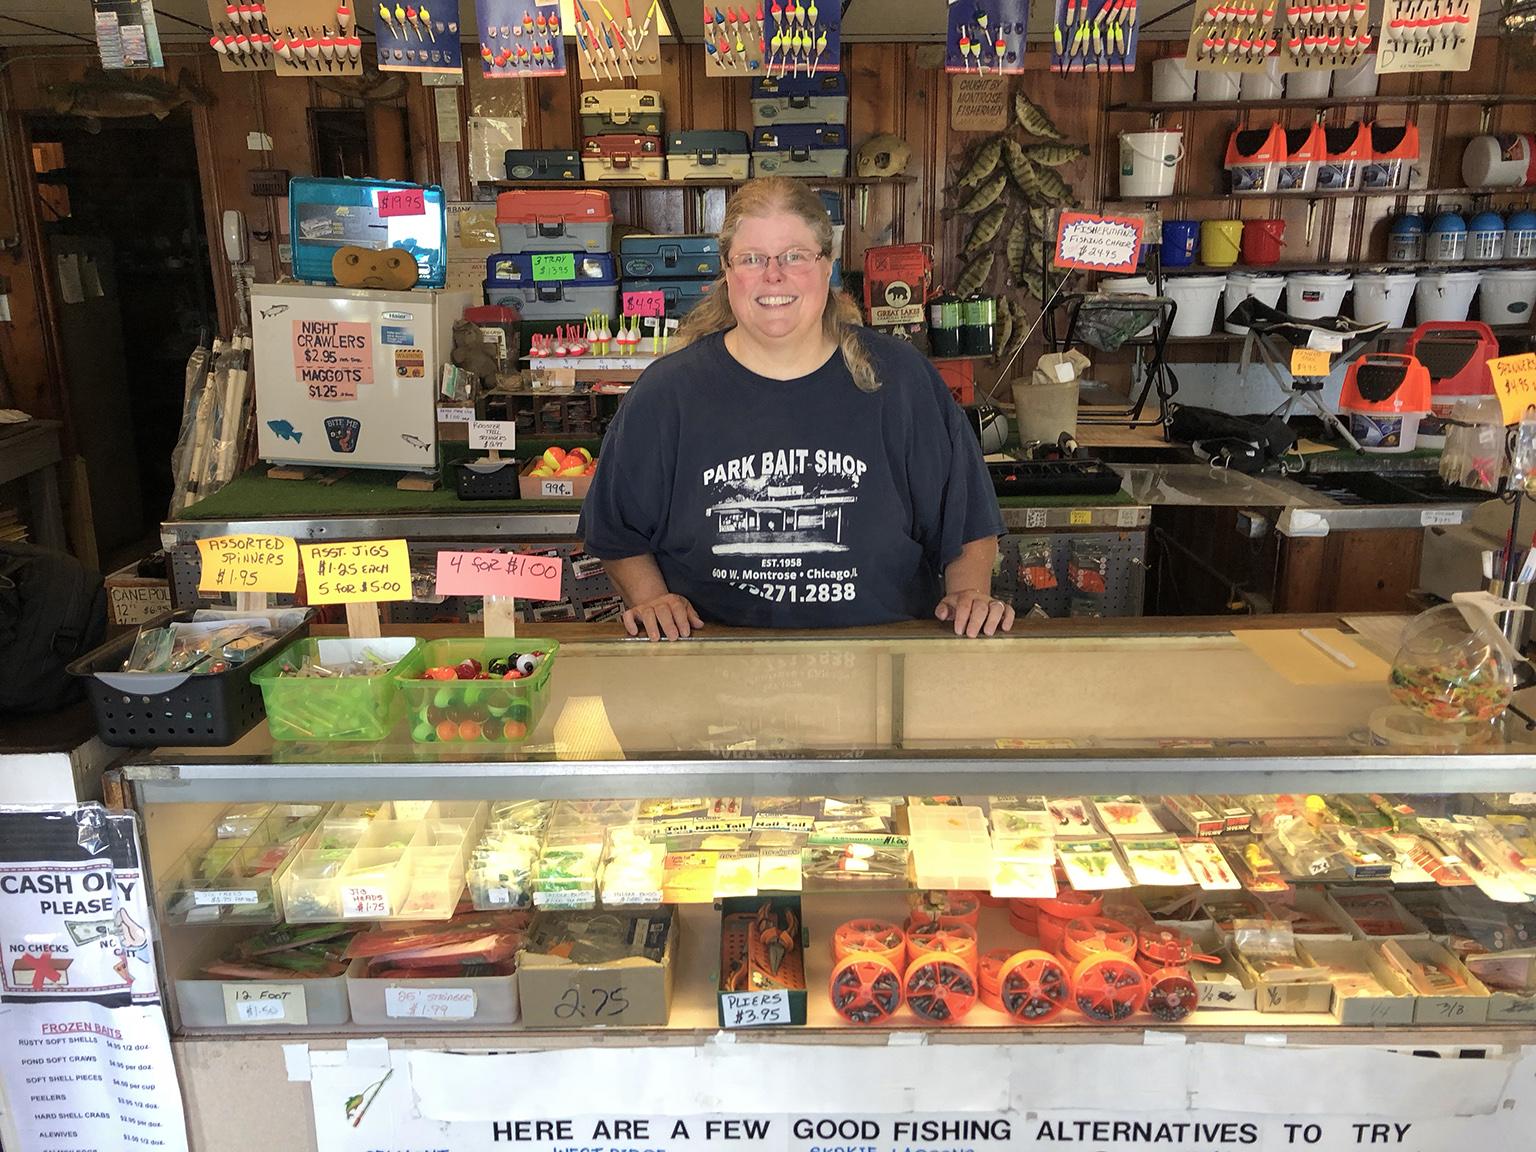 Stacey Greene is the owner of Park Bait Shop at Montrose Harbor. There has been a bait shop on that spot since at least the 1930s. Her father, Willie Greene, founded Park Bait in 1958. (Jay Shefsky / Chicago Tonight)